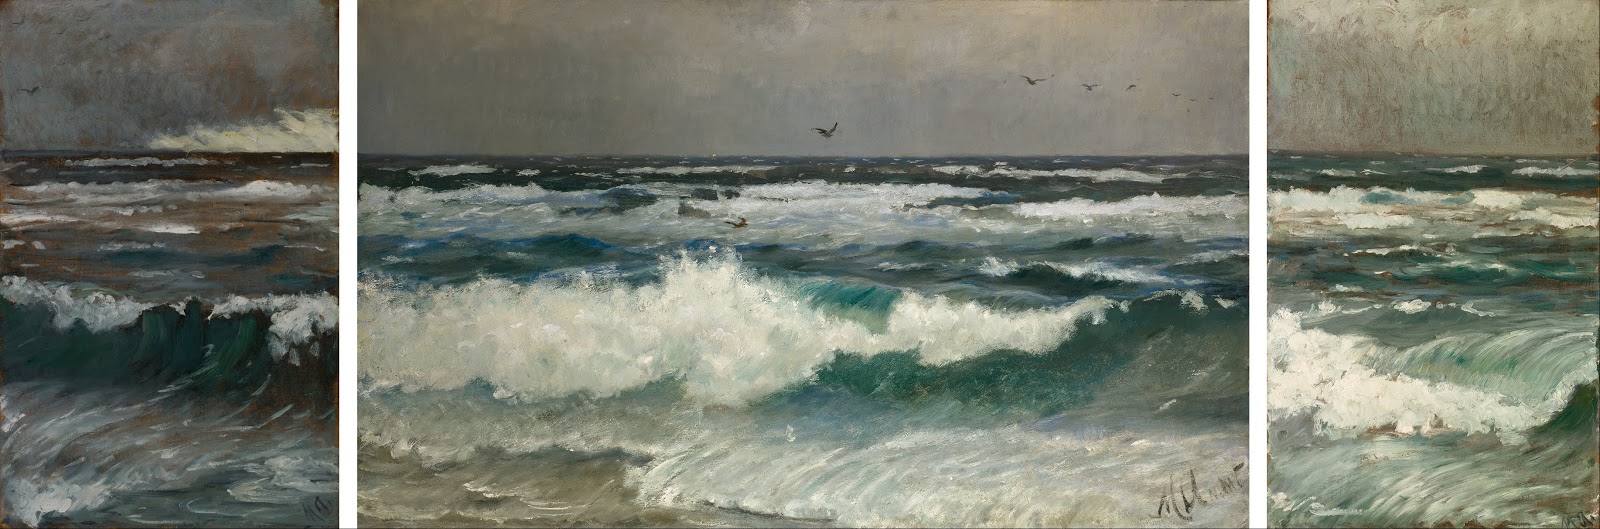 Michael Ancher  reakers on the coast